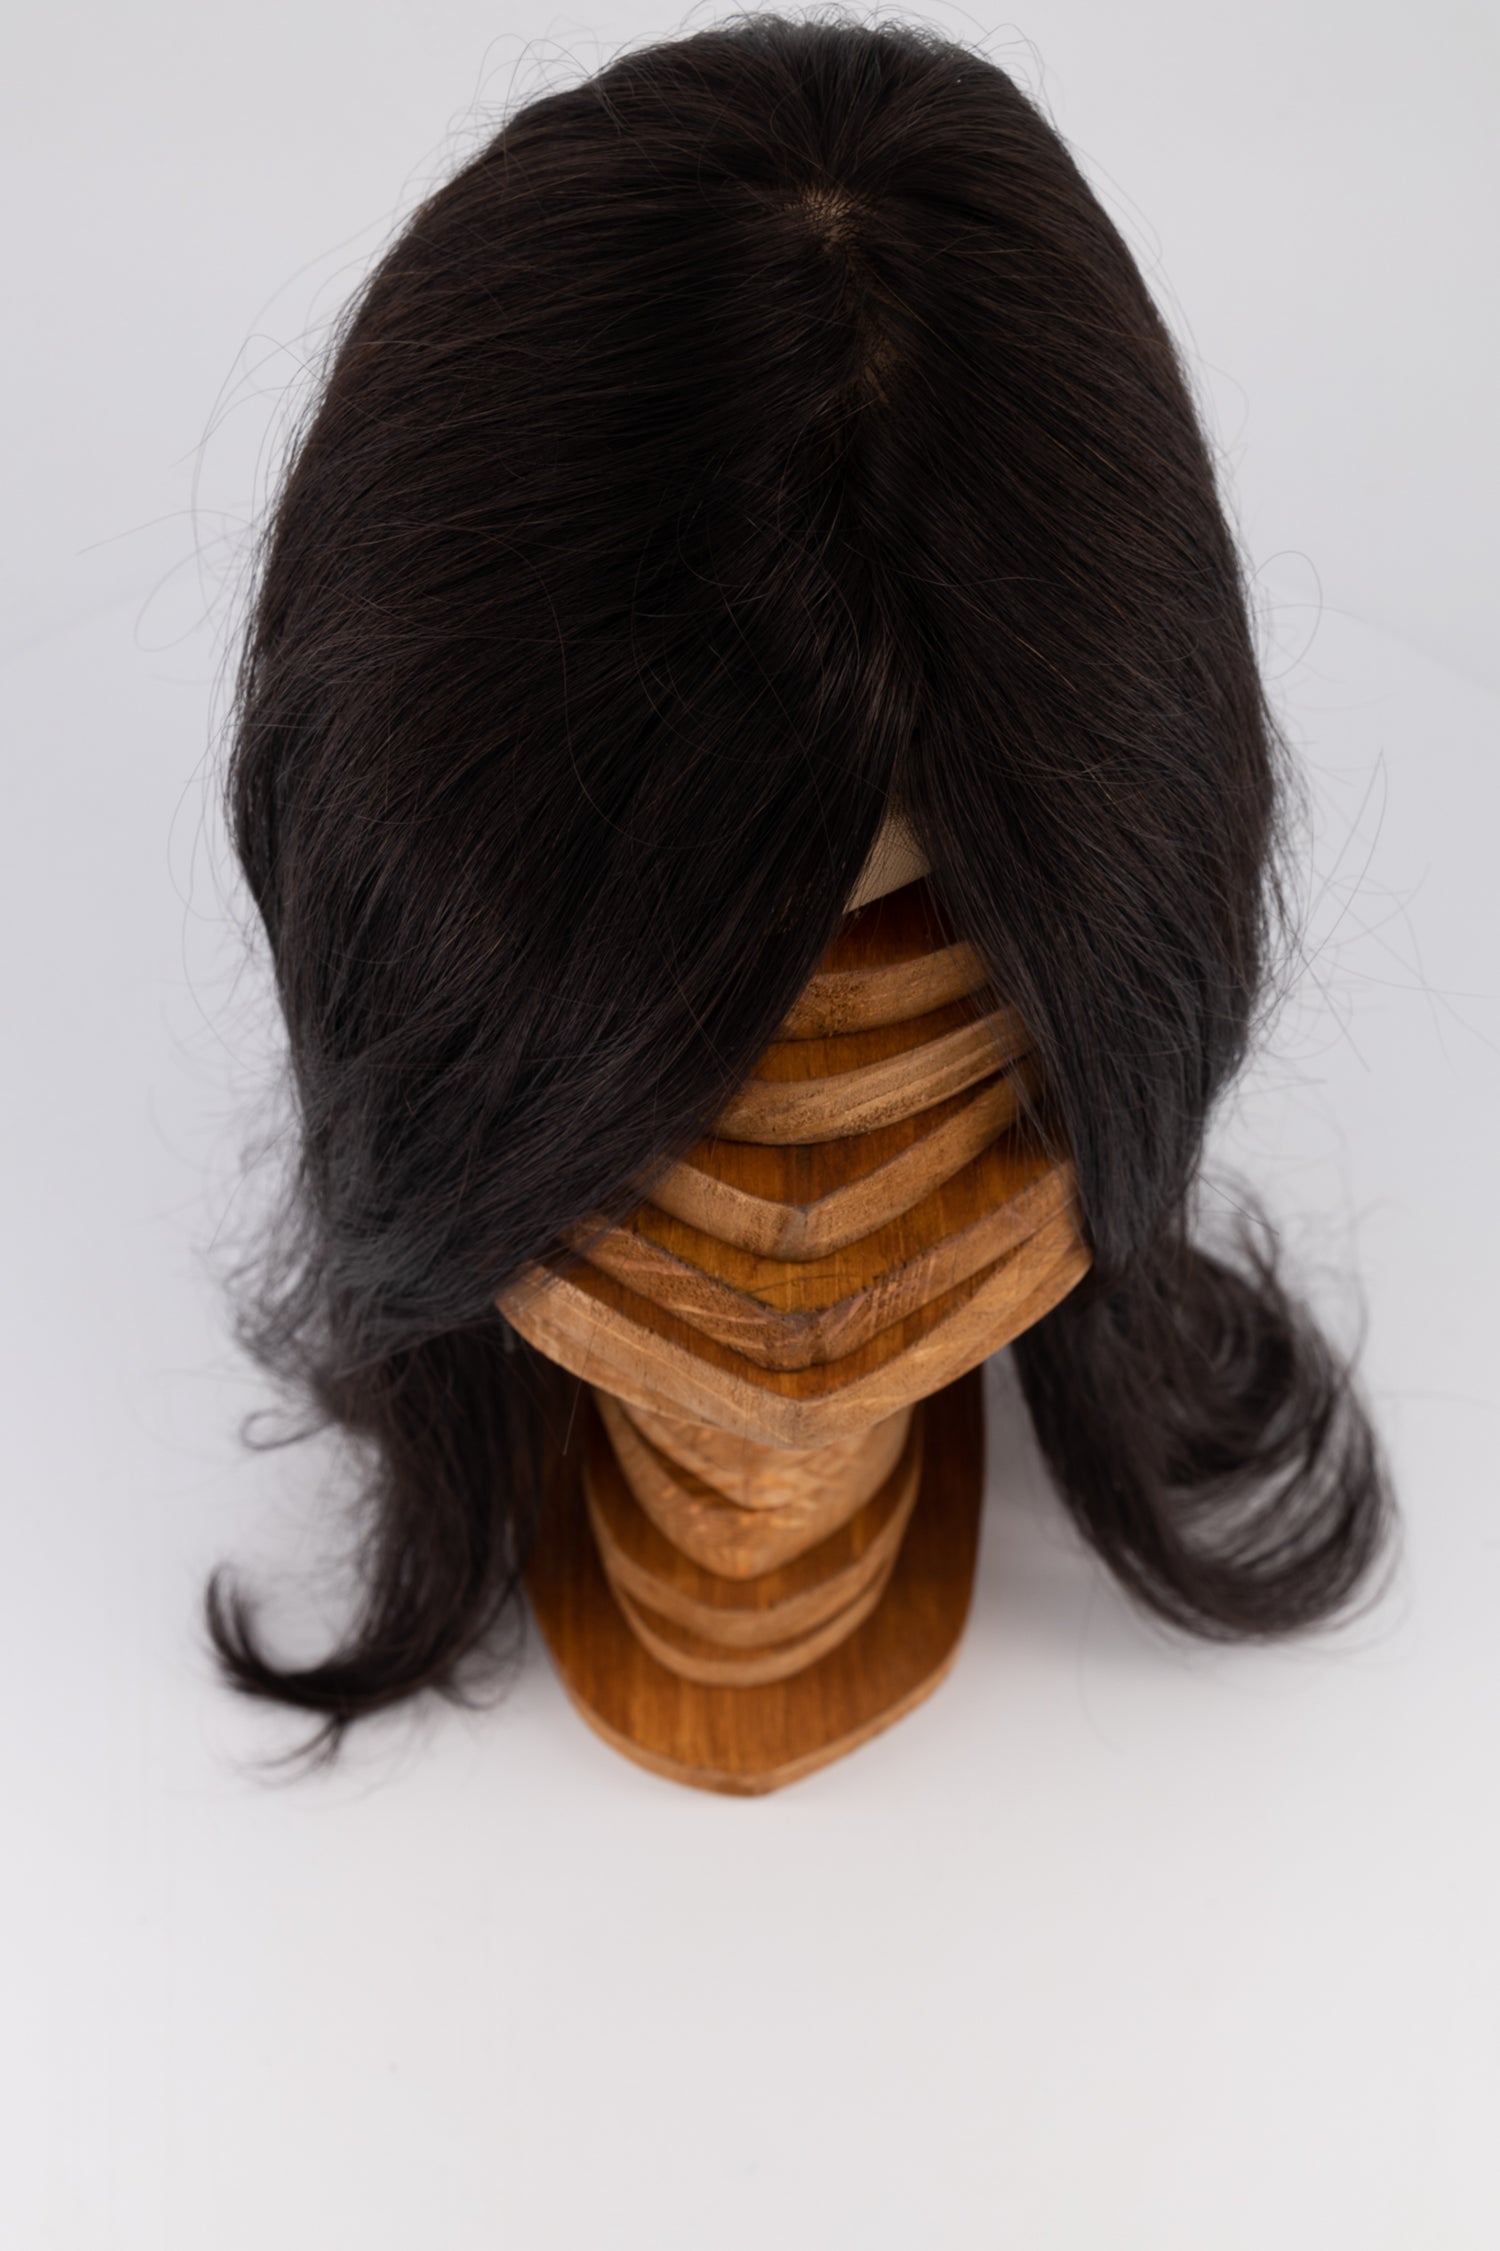 Frotnrow crown topper hair extensions in brown black